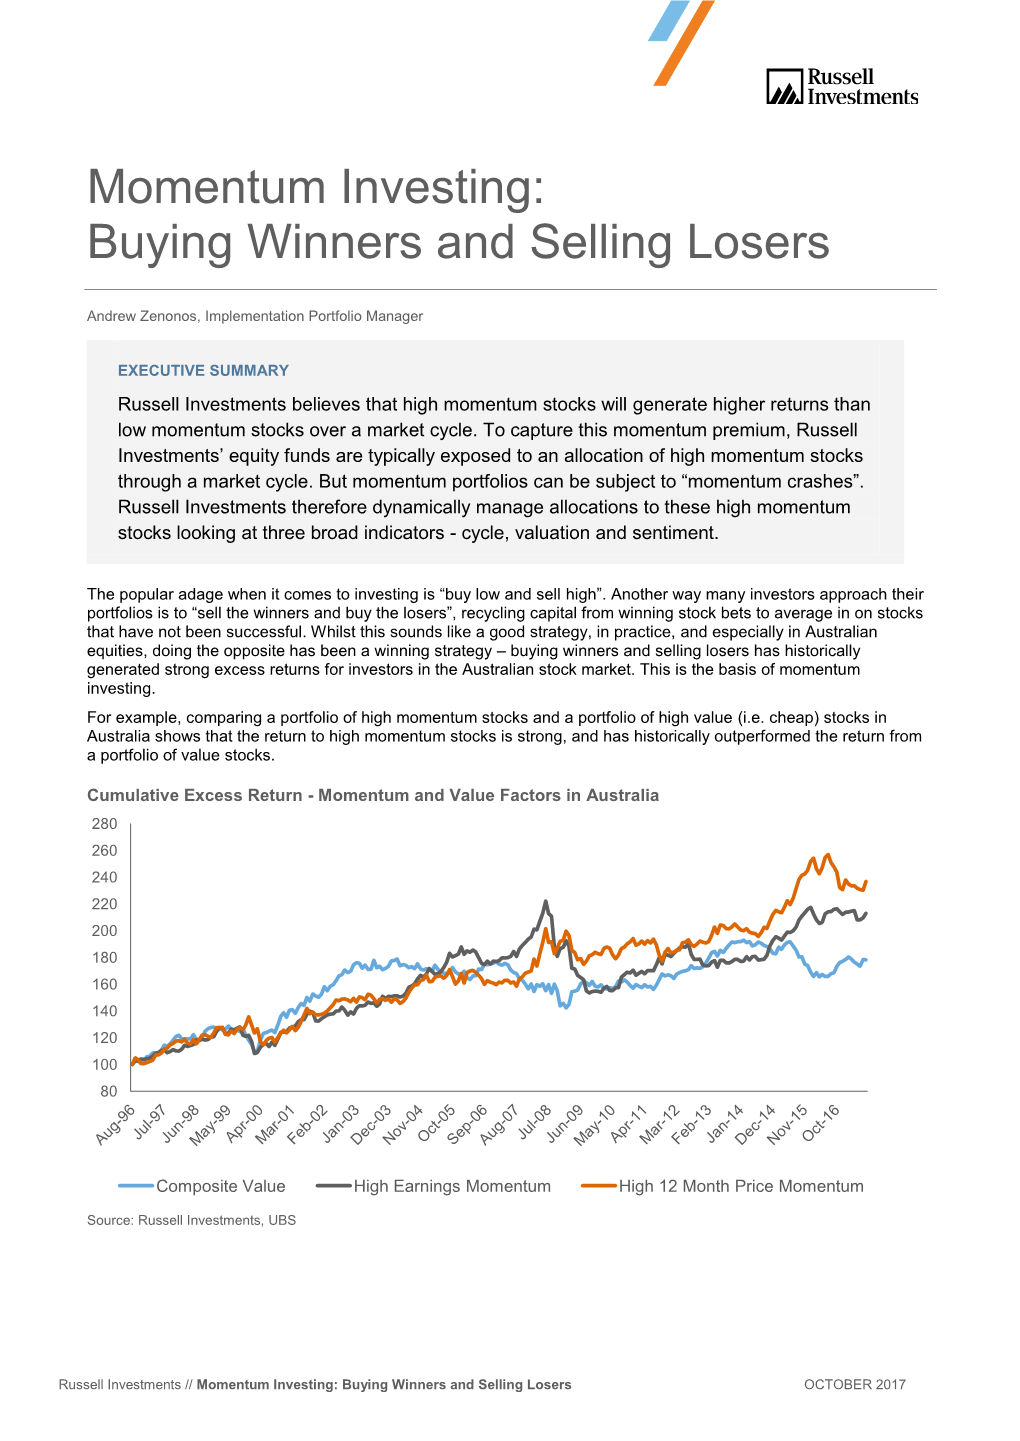 Buying Winners and Selling Losers